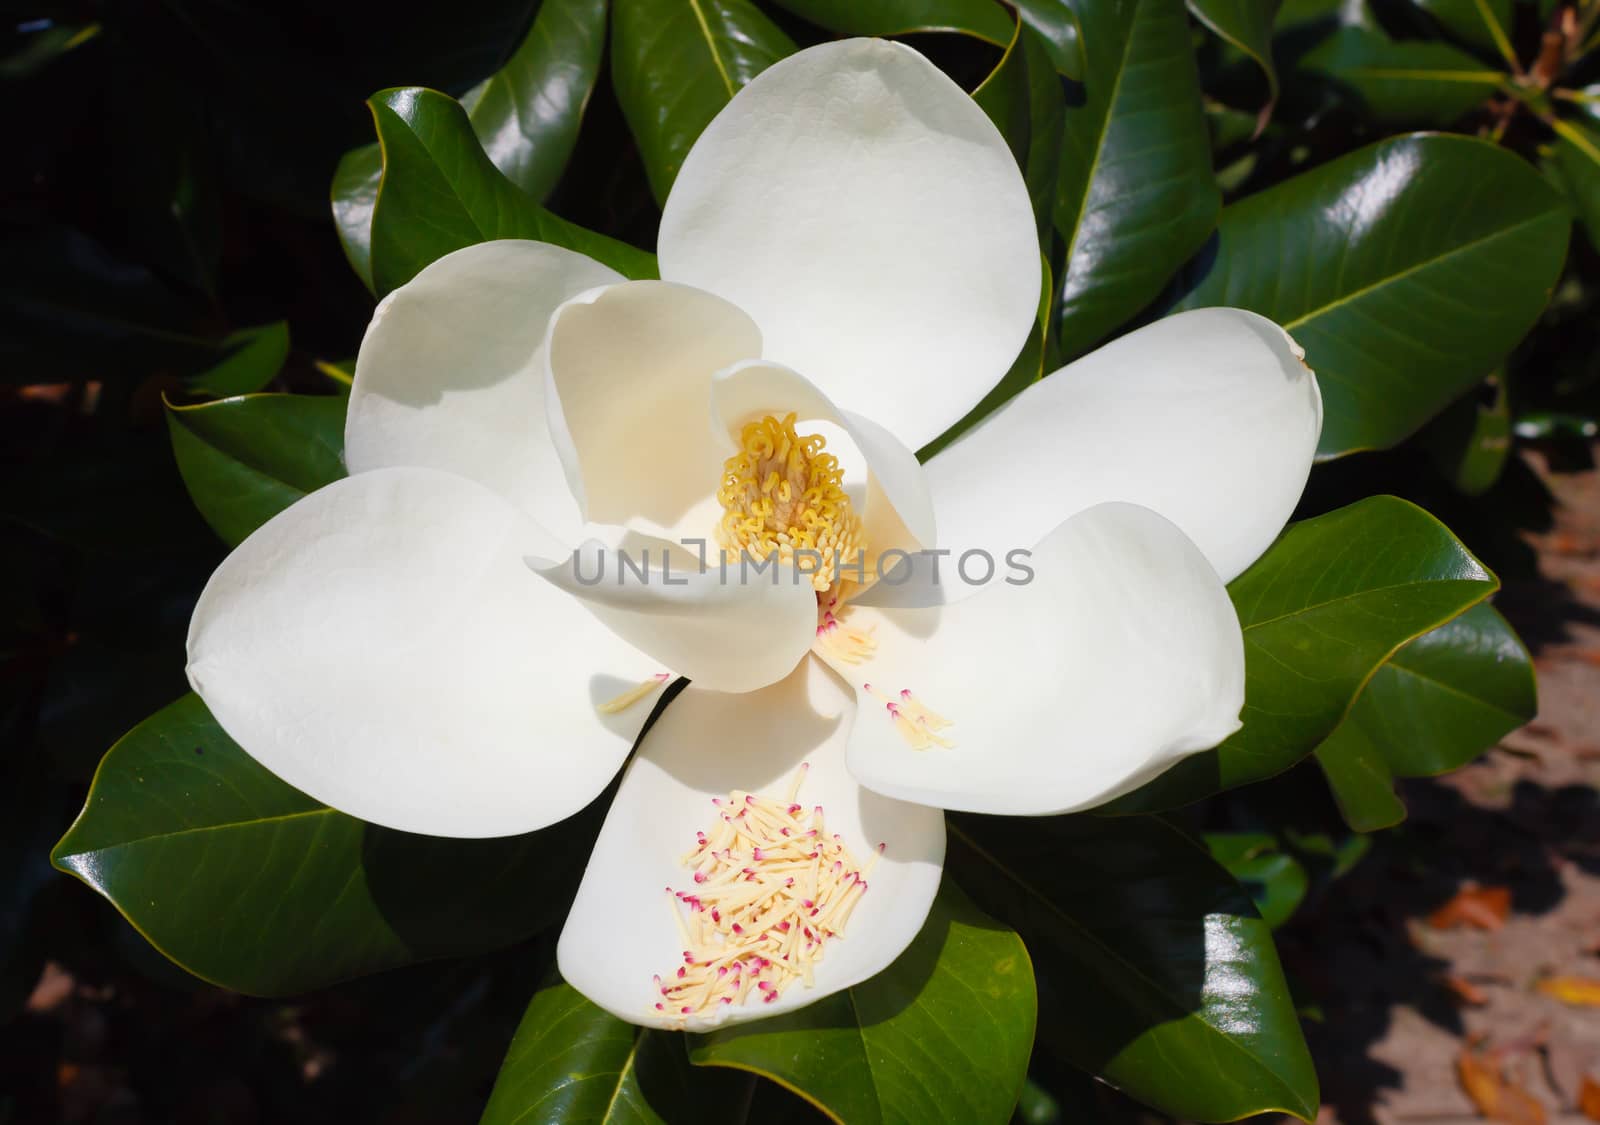 the magnolia grandiflora is an ornamental tree  with large and shiny leaves  and white fleshy and scented flowers